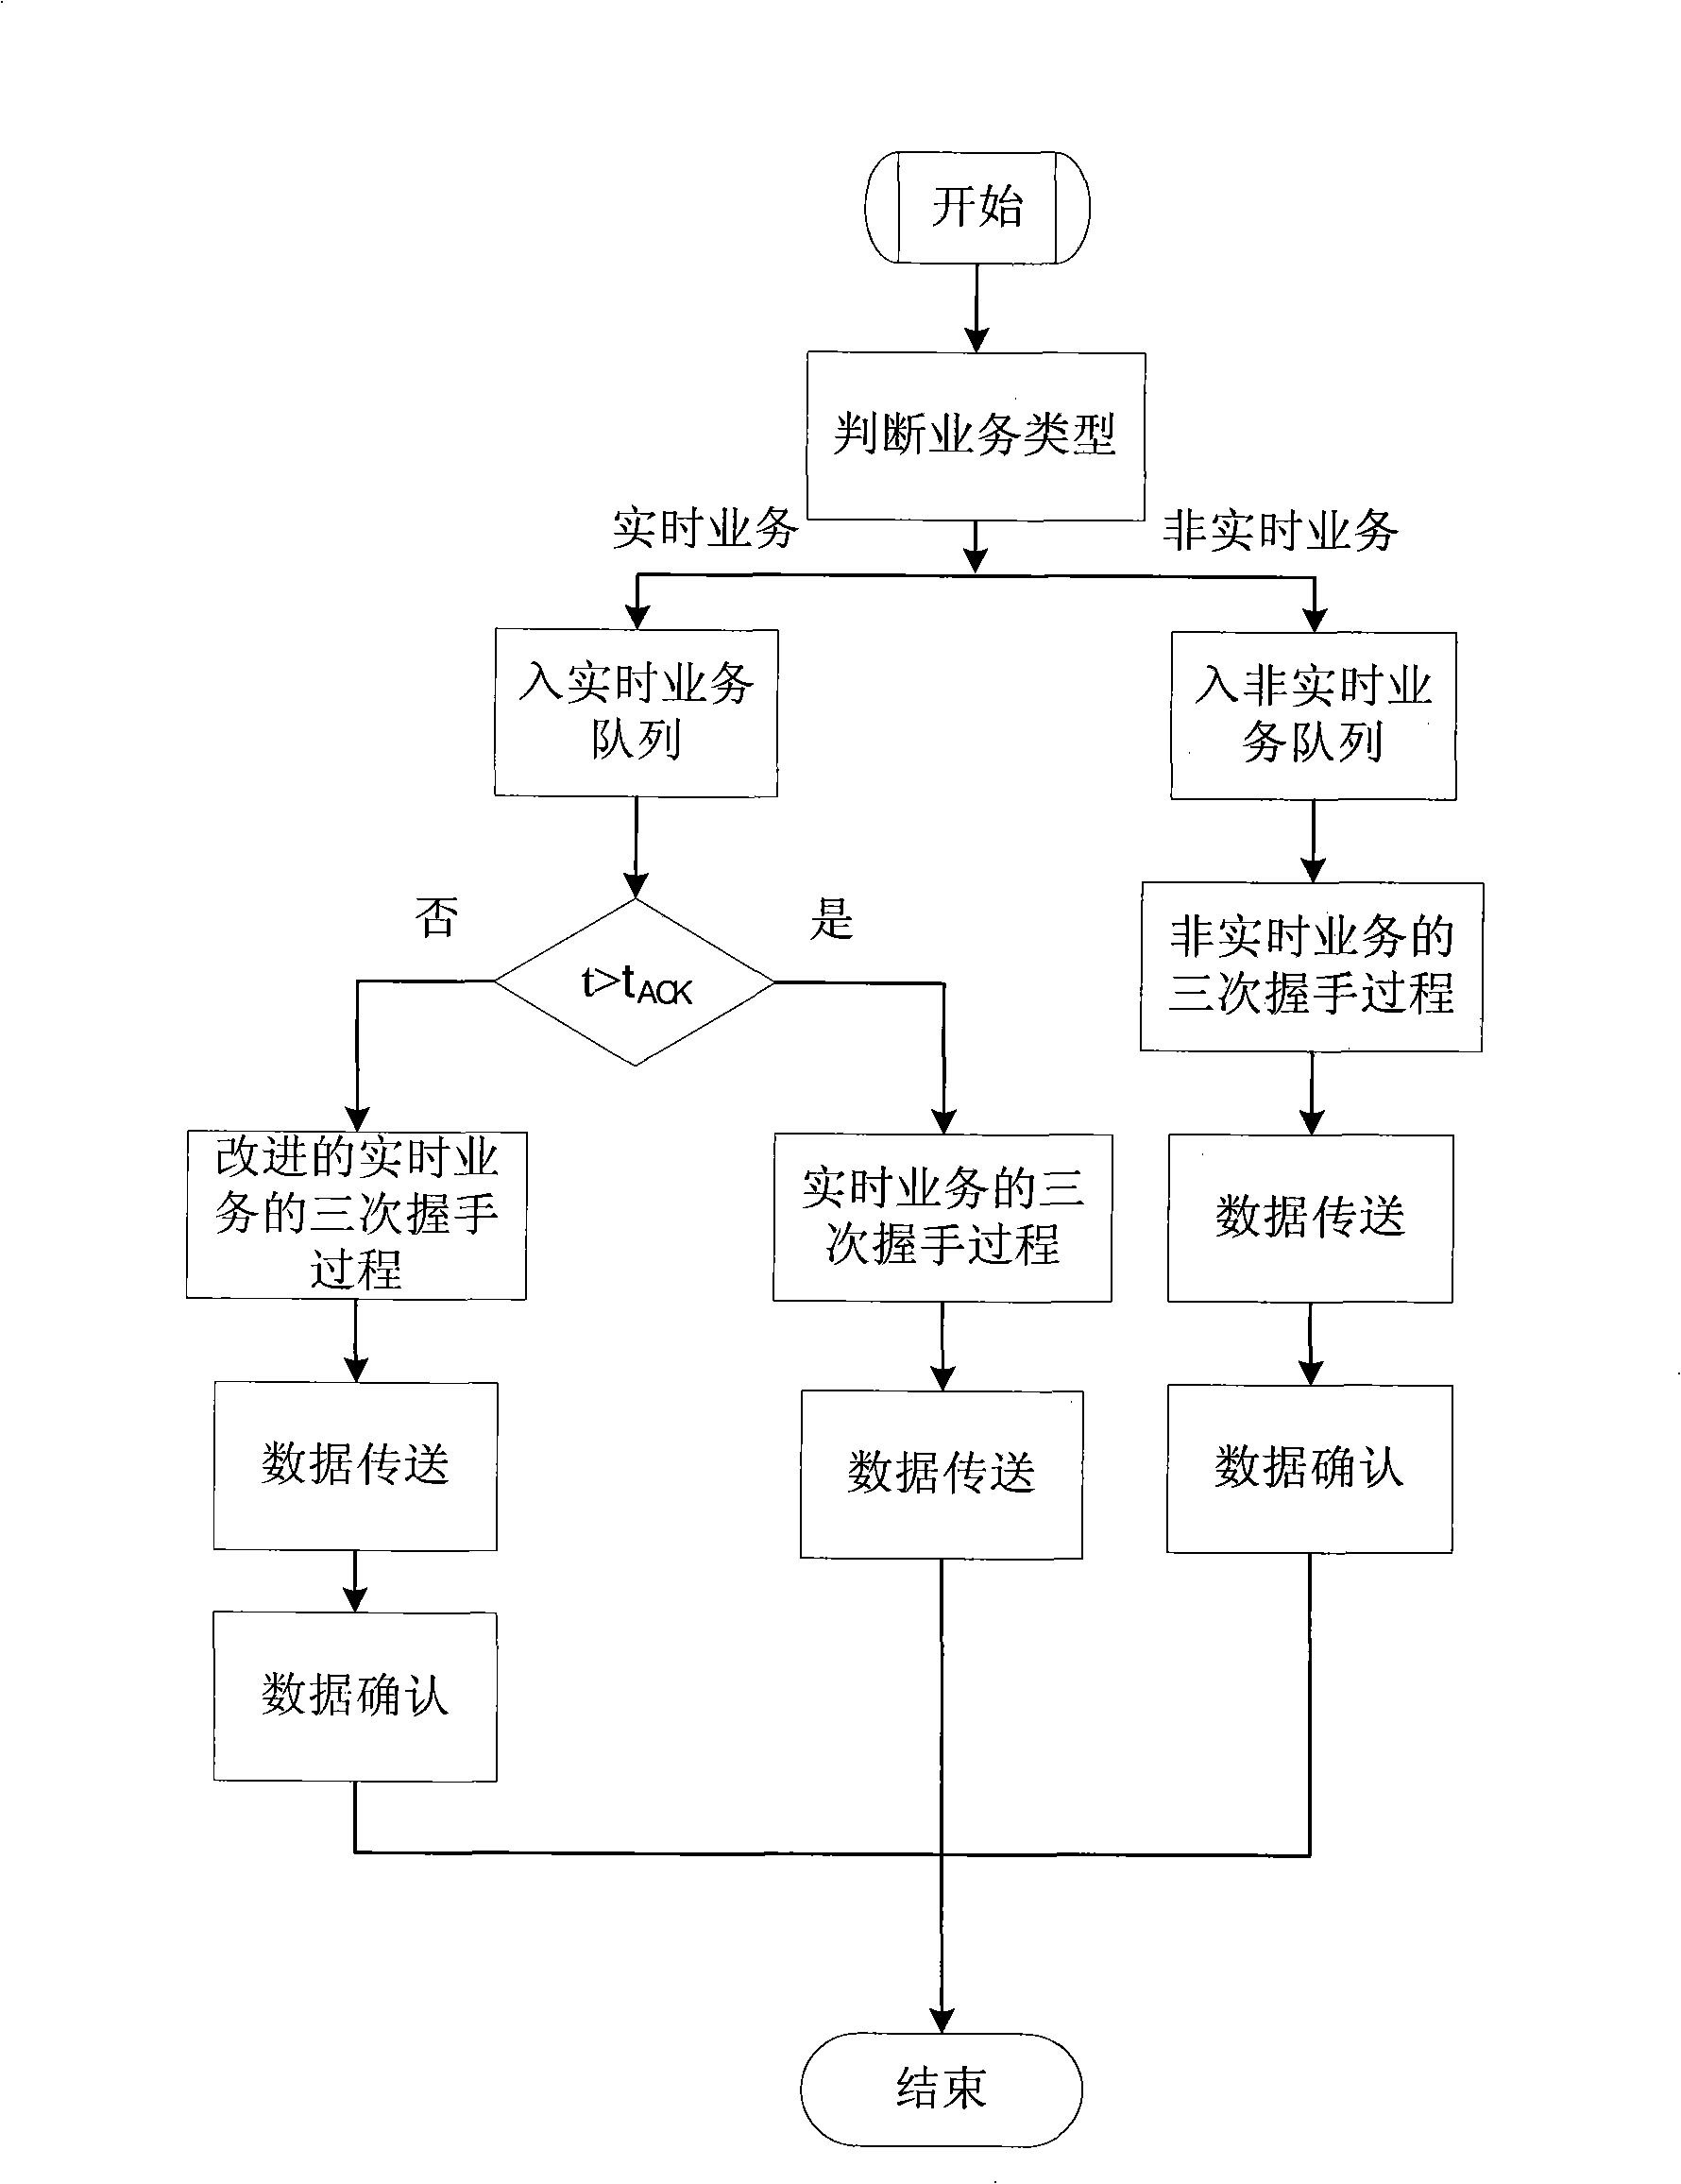 Method for ensuring reliability of 802.16MAC layer supporting service differentiation